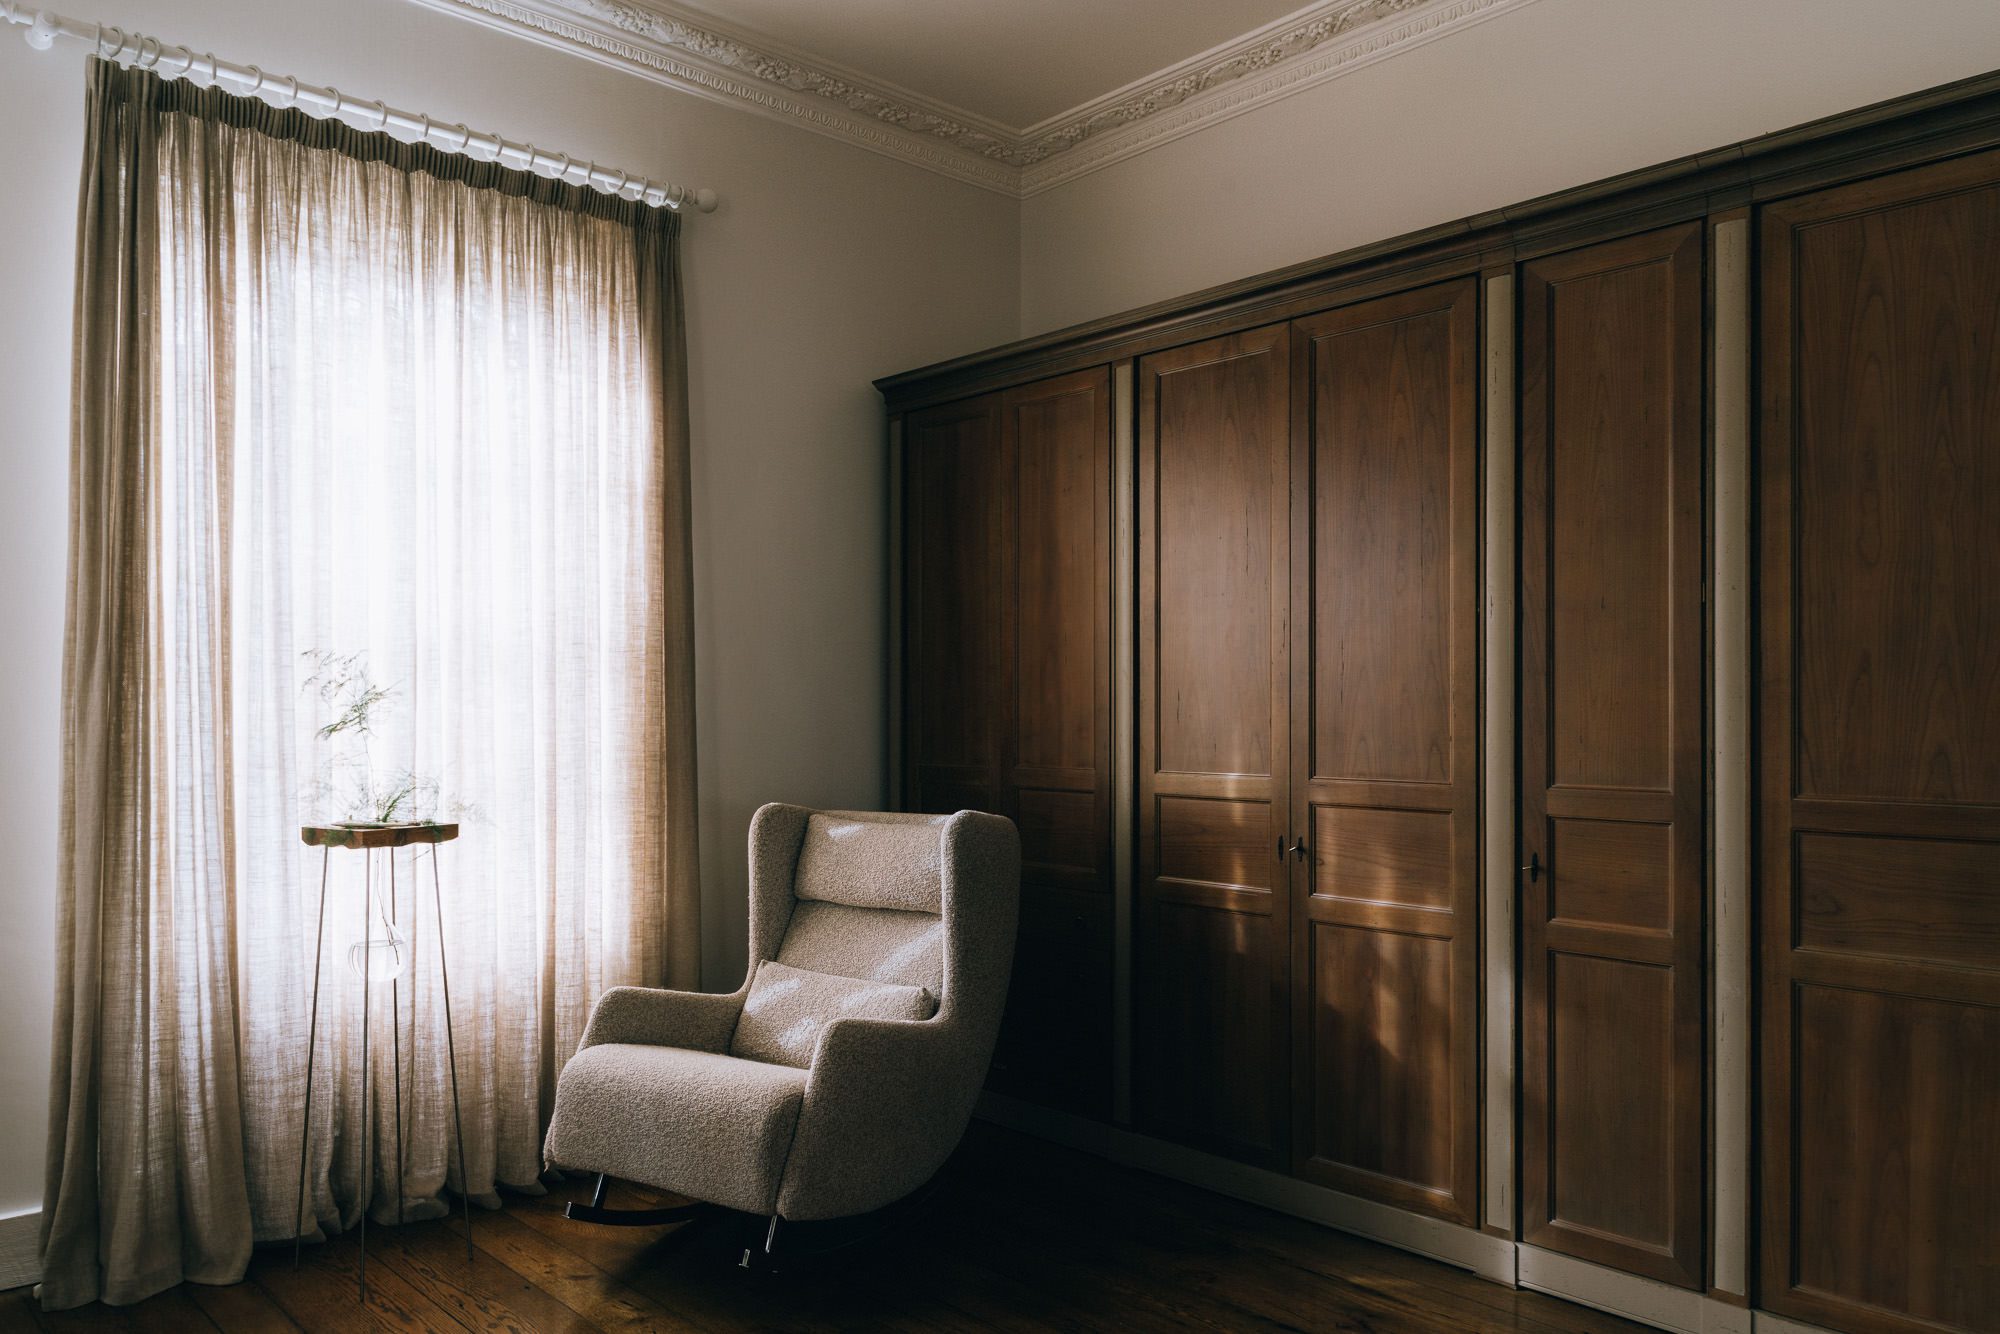 A detailed capture of the interior of a room, featuring a sofa, with brown wardrobes in the background and a curtain on the side, skillfully photographed by Brett Charles for interior architecture photography in the UK.